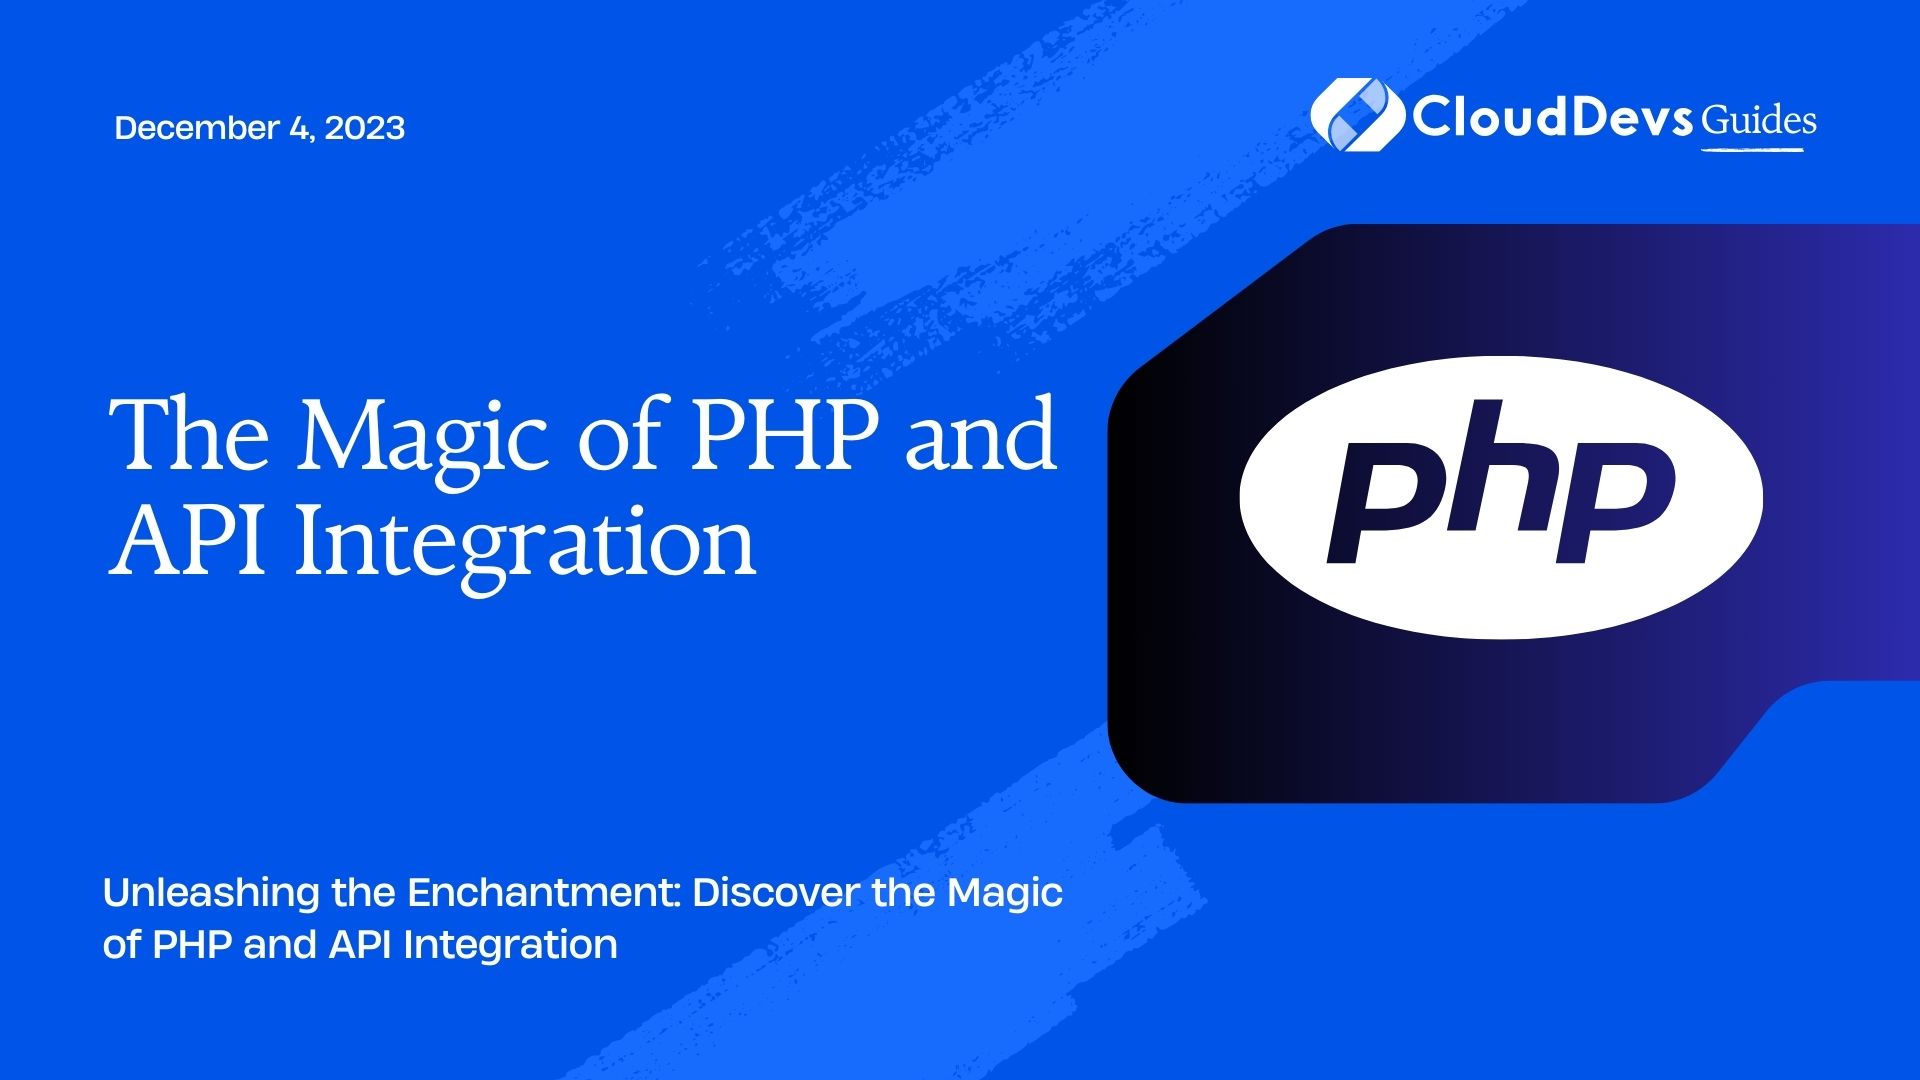 The Magic of PHP and API Integration